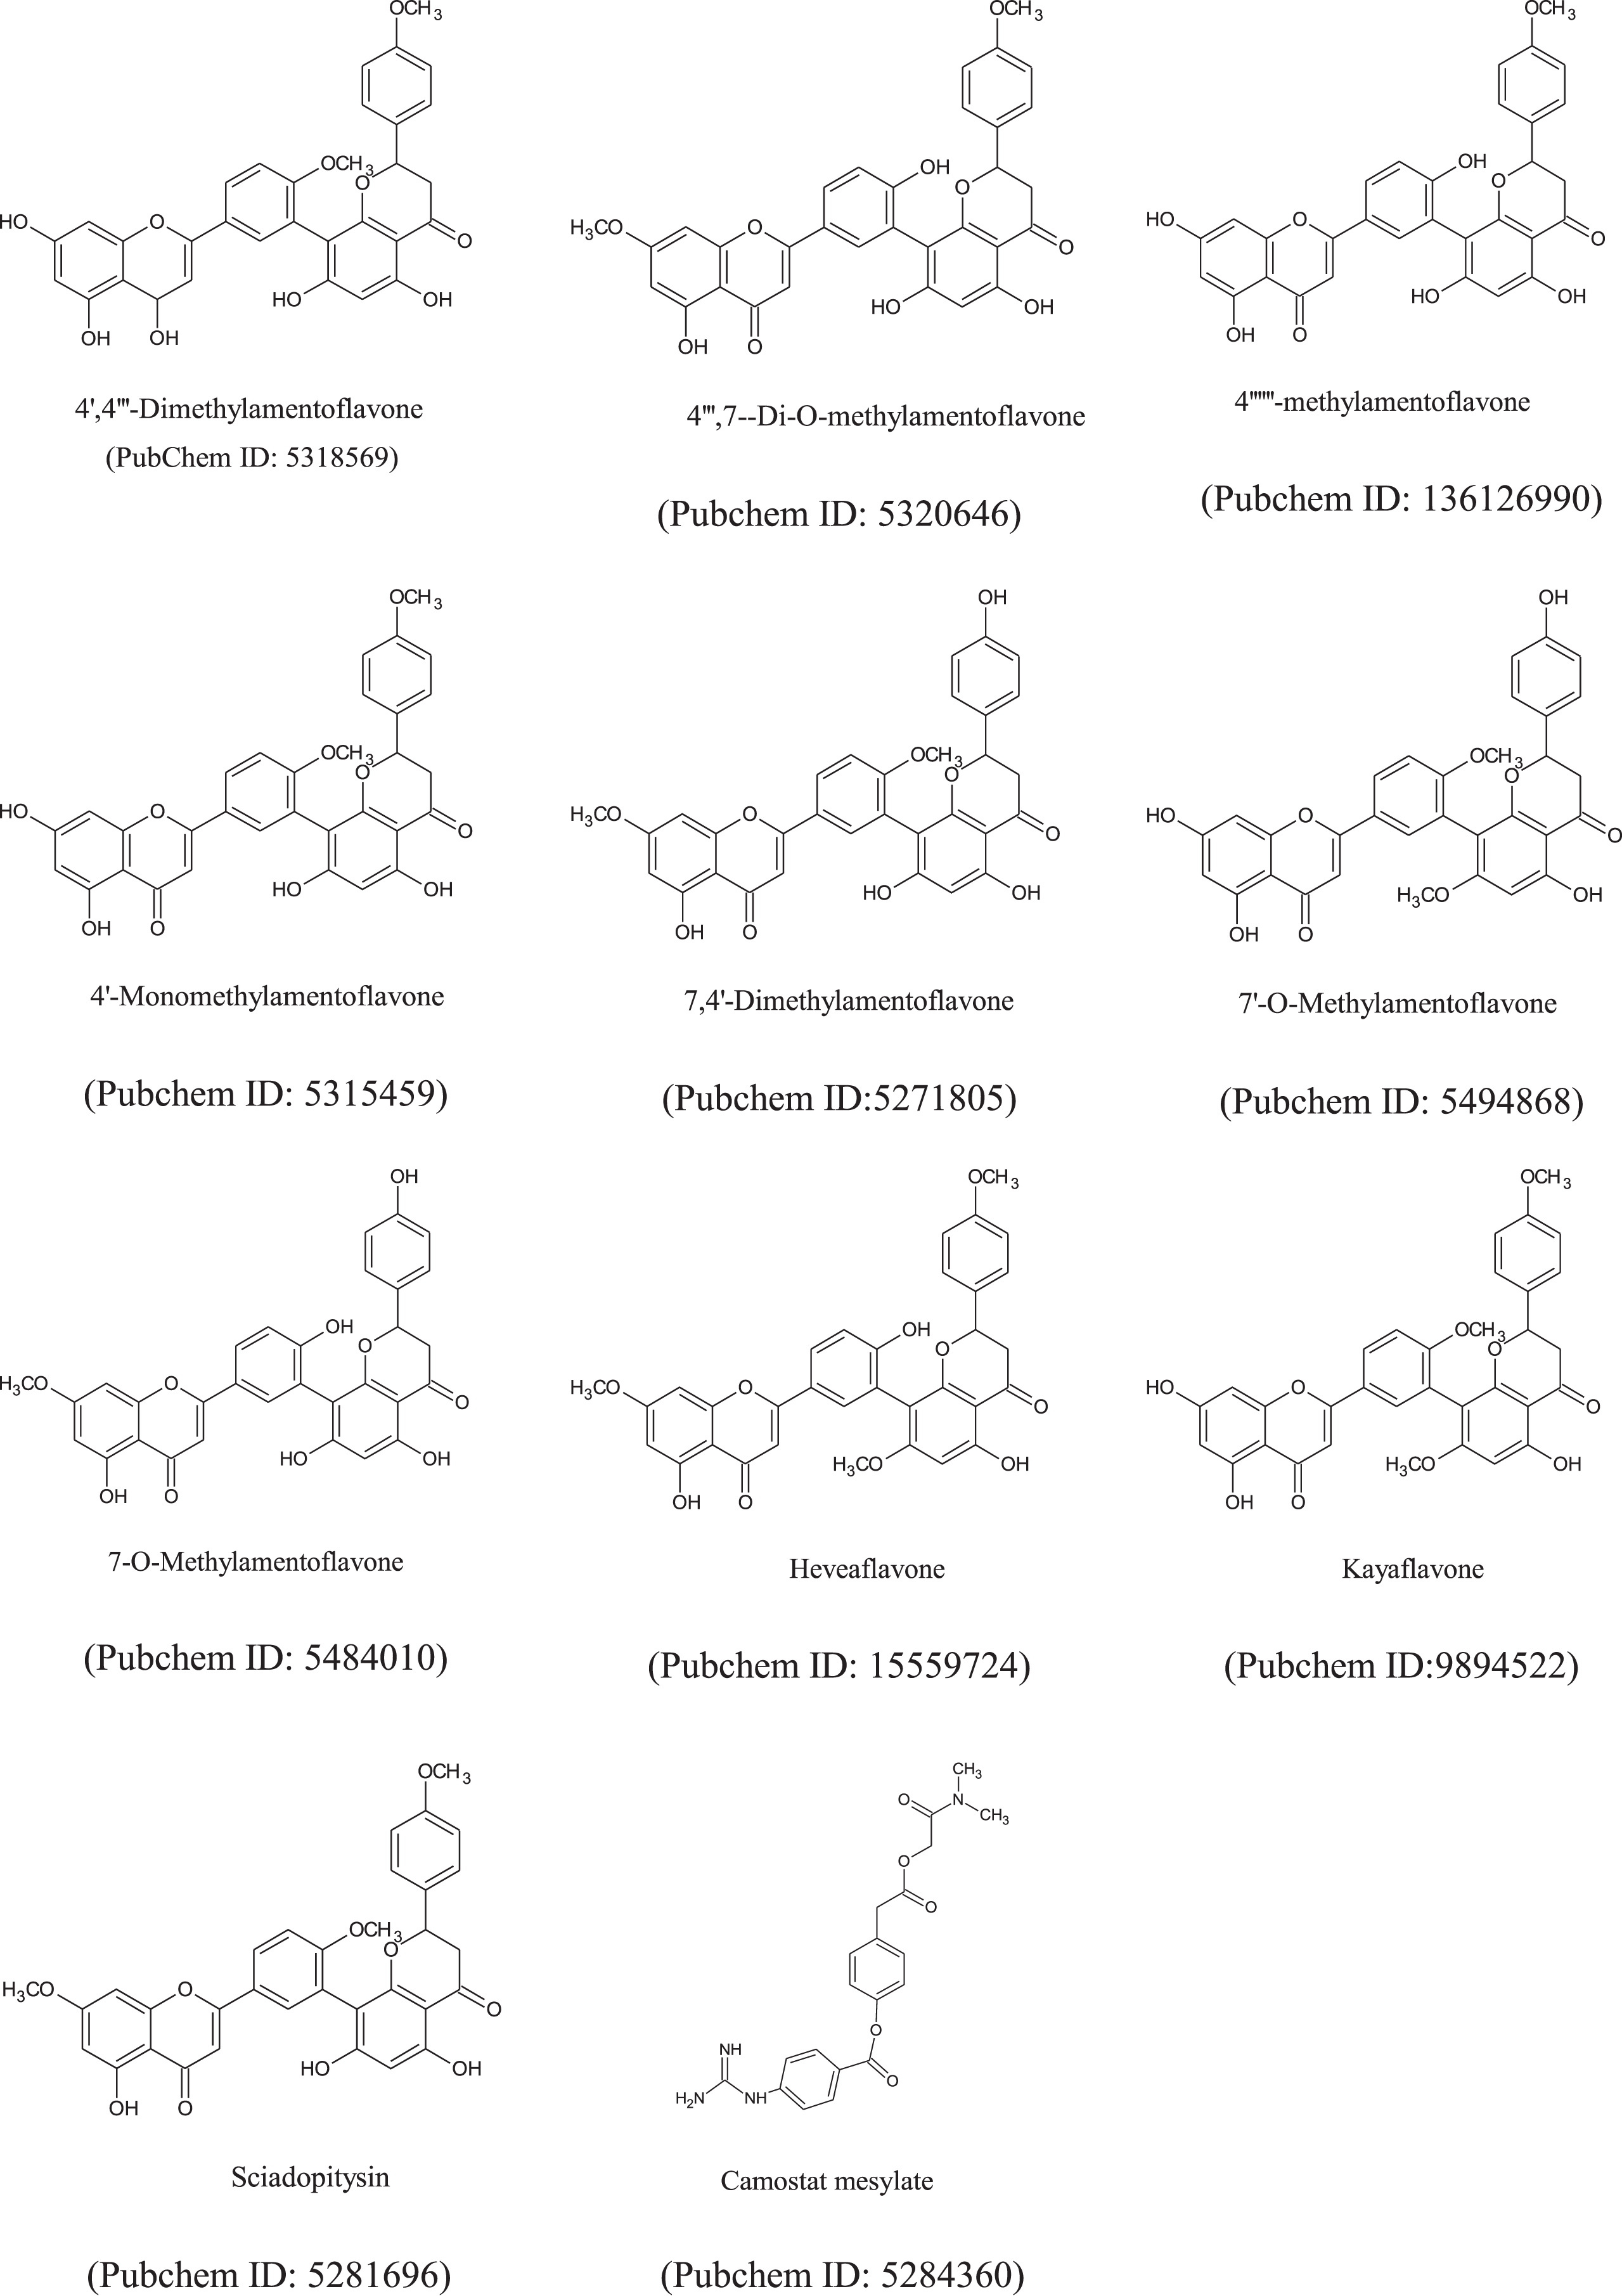 The chemical structures of amentoflavone’s derivatives and FDA-approved anti-viral drugs.